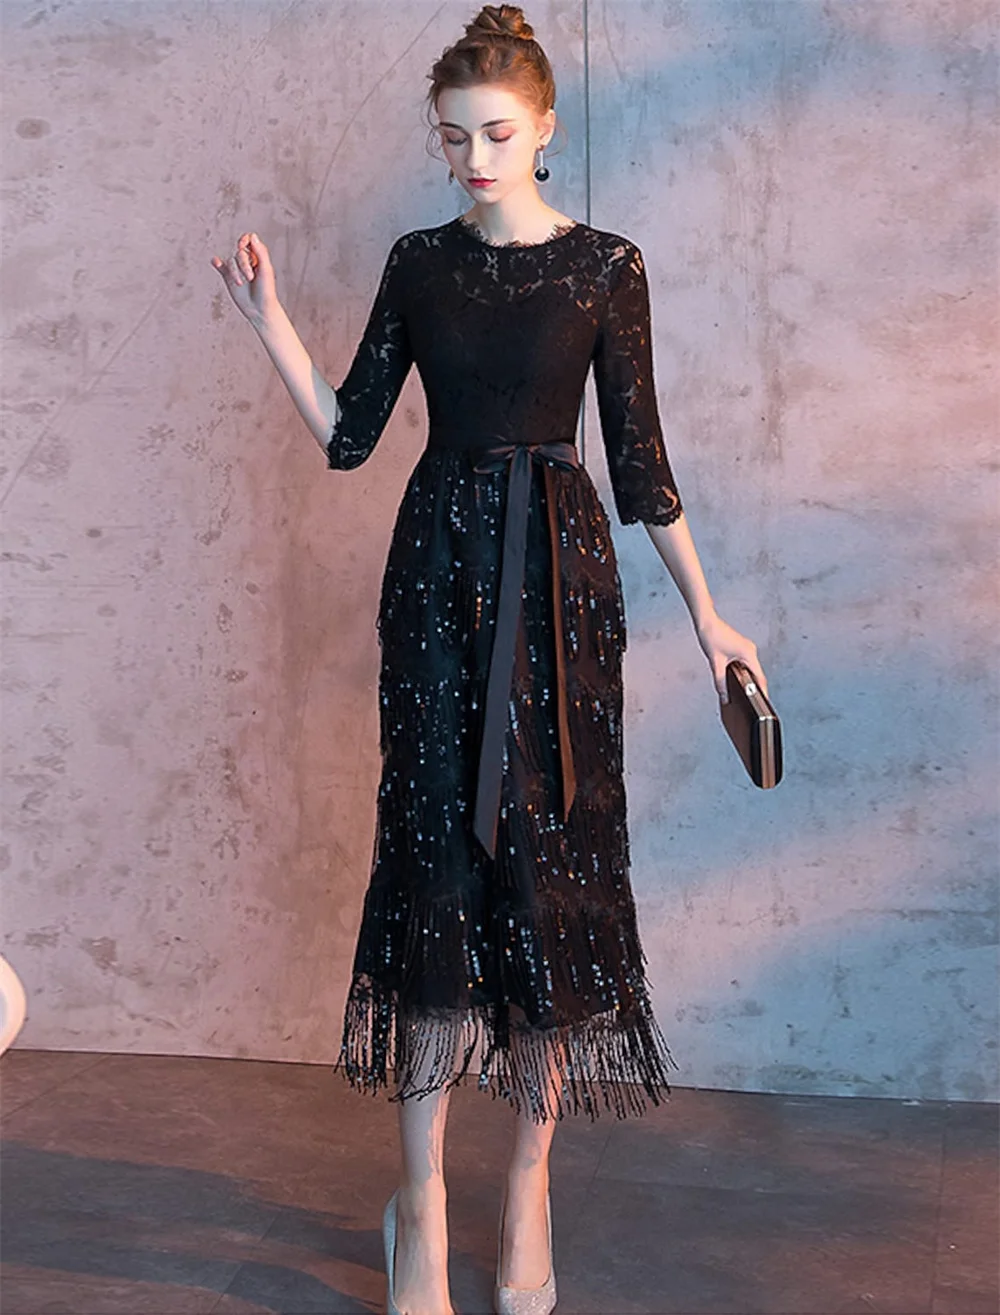 

Little Black Sparkle Homecoming Dress Jewel Neck Half Sleeve Tea Length Lace with Sash Cocktail Party Ribbon Sequin Tassel